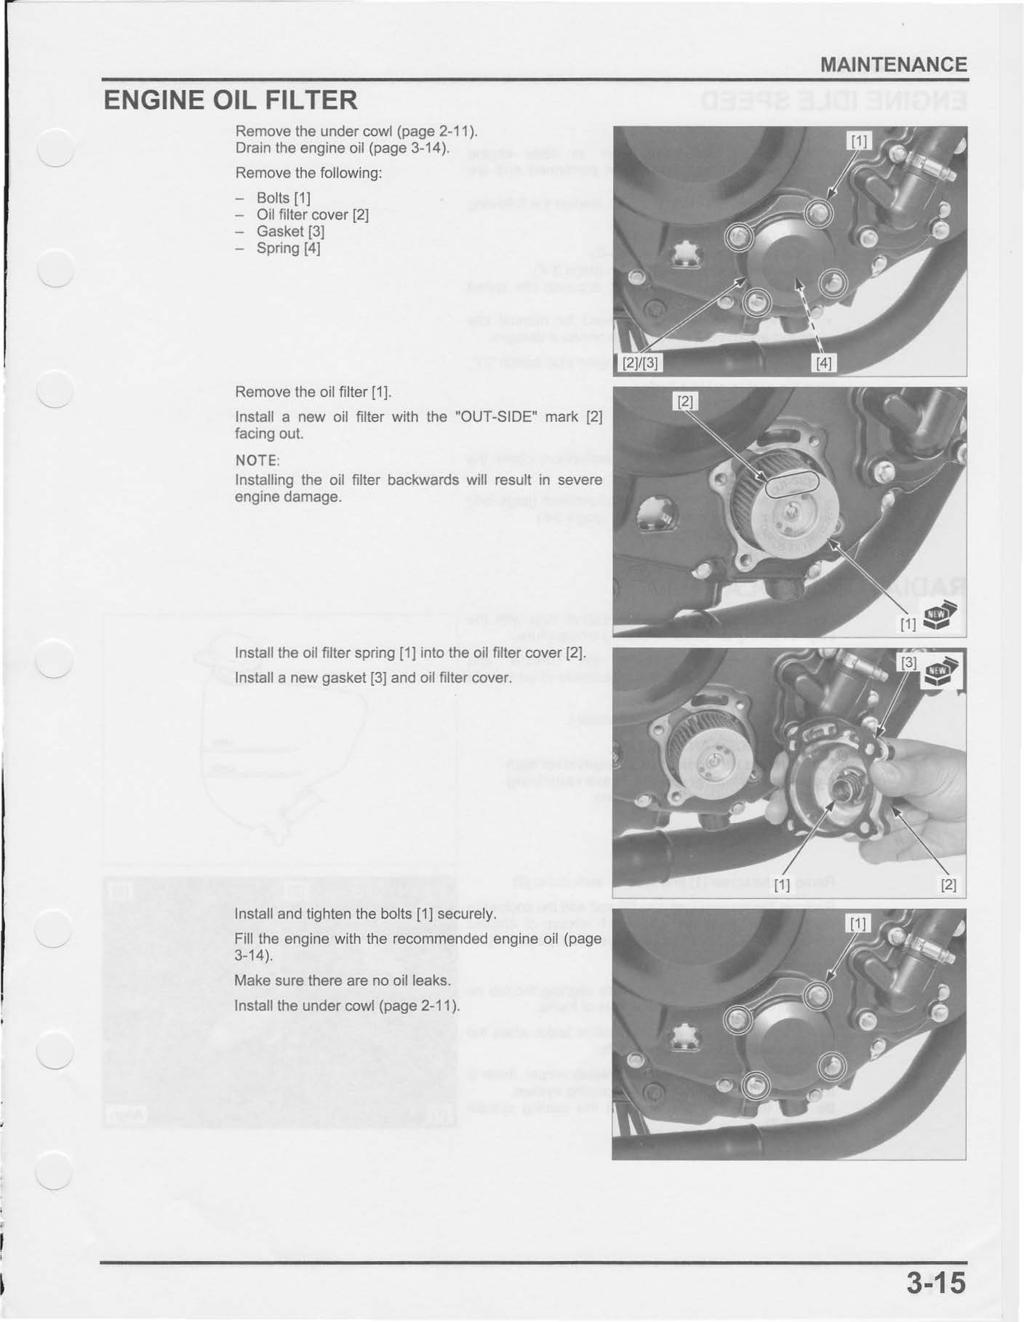 ENGINE OIL FILTER Remove the under cowl (page 2-11). Drain the engine oil (page 3-14).